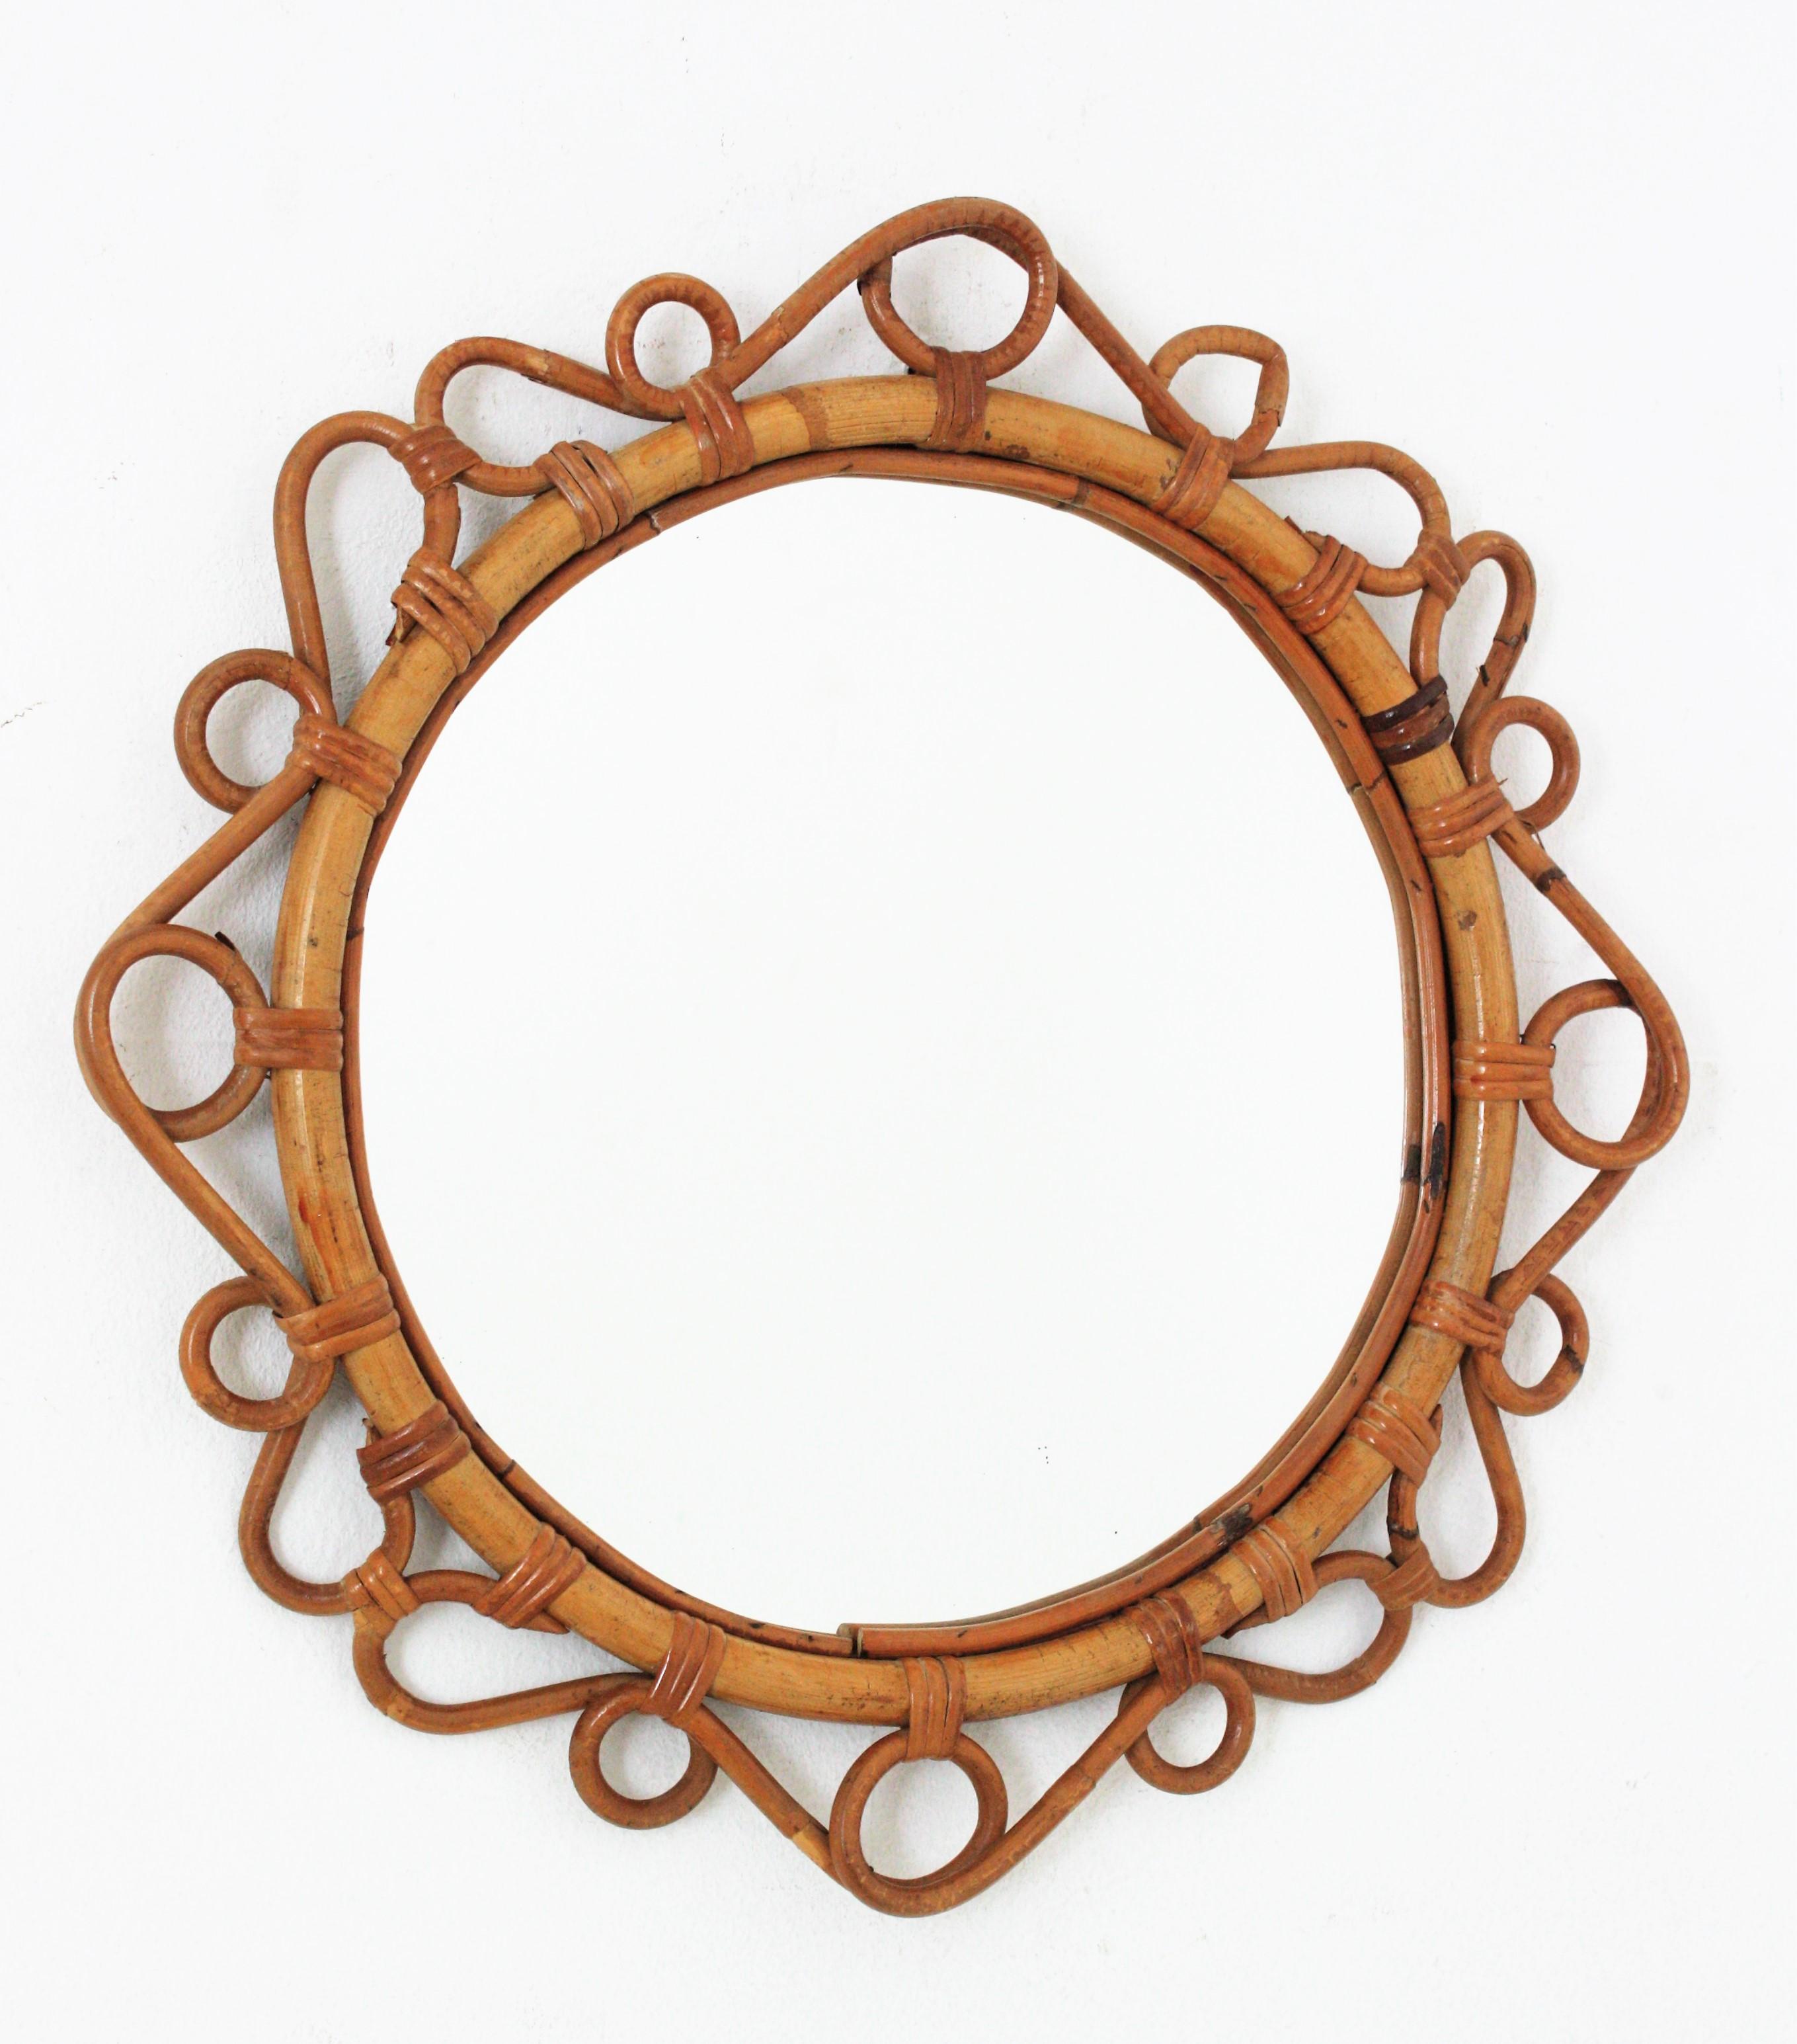 Eye-catching handcrafted bamboo and rattan oval mirror with scroll detailing surrounding the frame. Spain, circa 1960s.
This Mediterranean wall mirror features an oval bamboo frame surrounded by rattan scroll and circle decorations.
It will add a